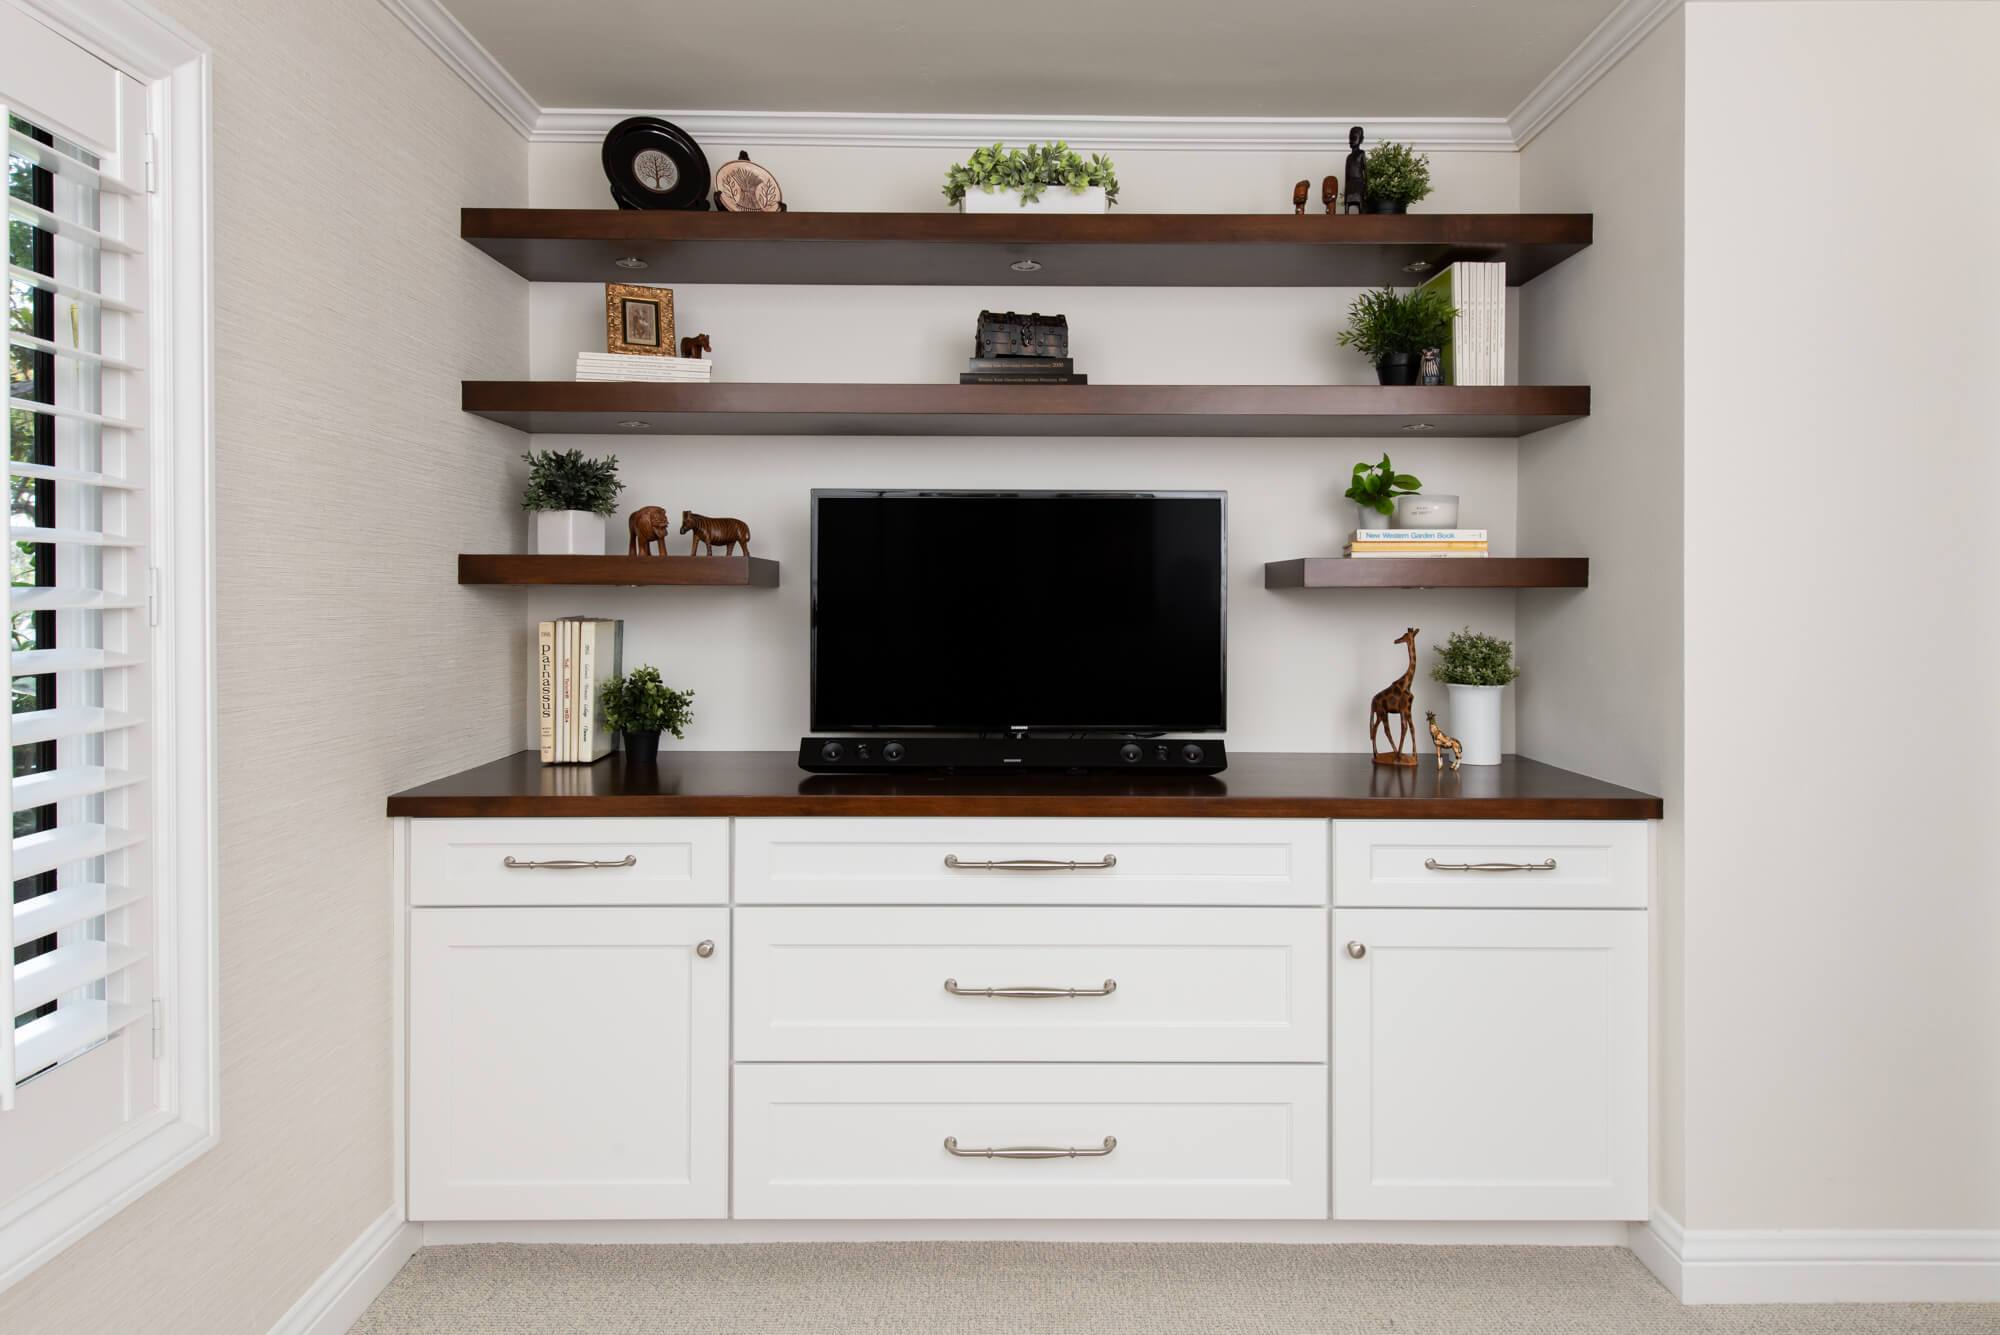 omega-dynasty-cabinets-in-pearl-white-with-wood-countertop-floating-shelves-satin-nickel-pulls